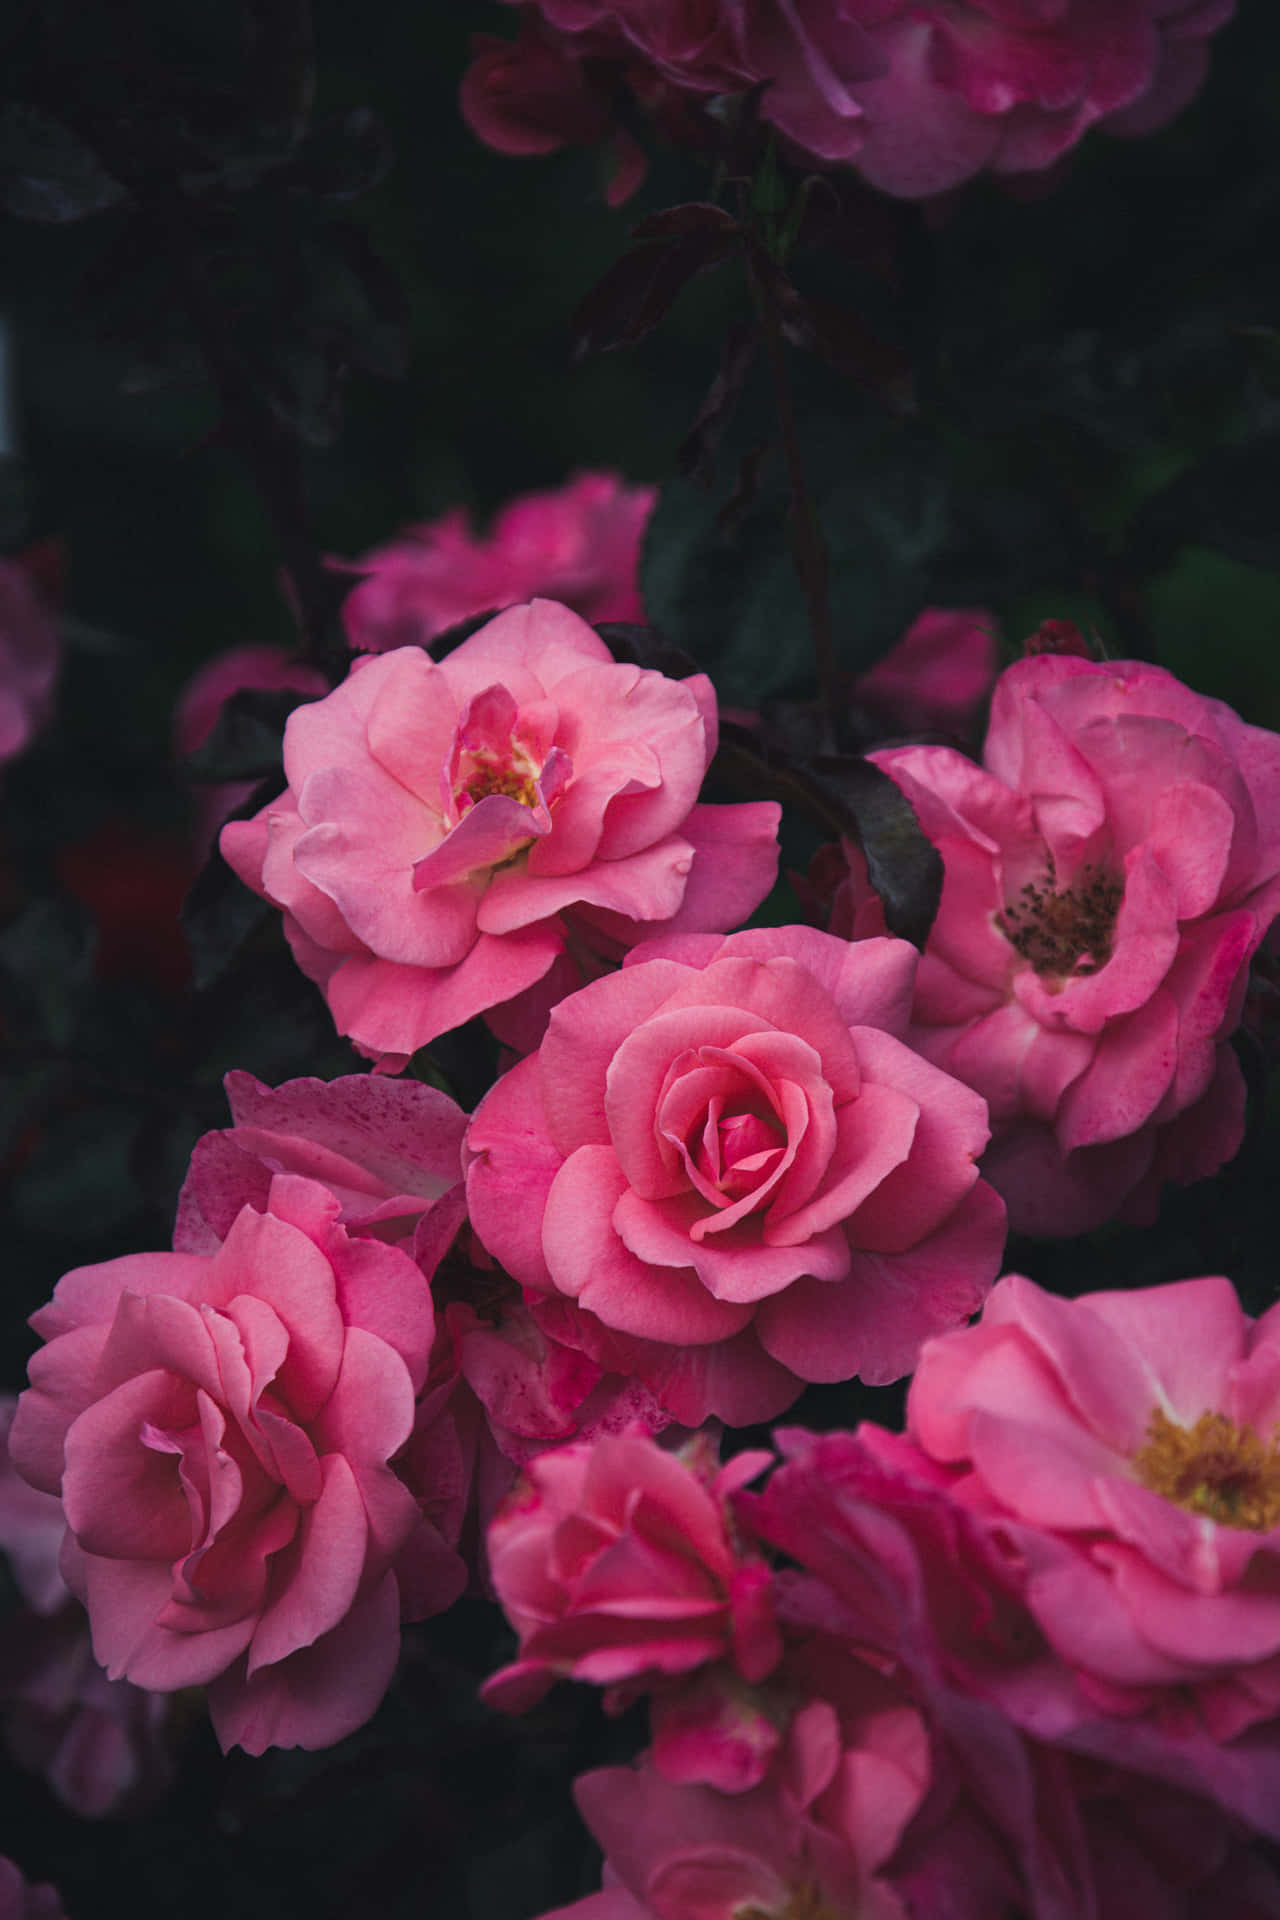 Beauty and Serenity of Roses Wallpaper